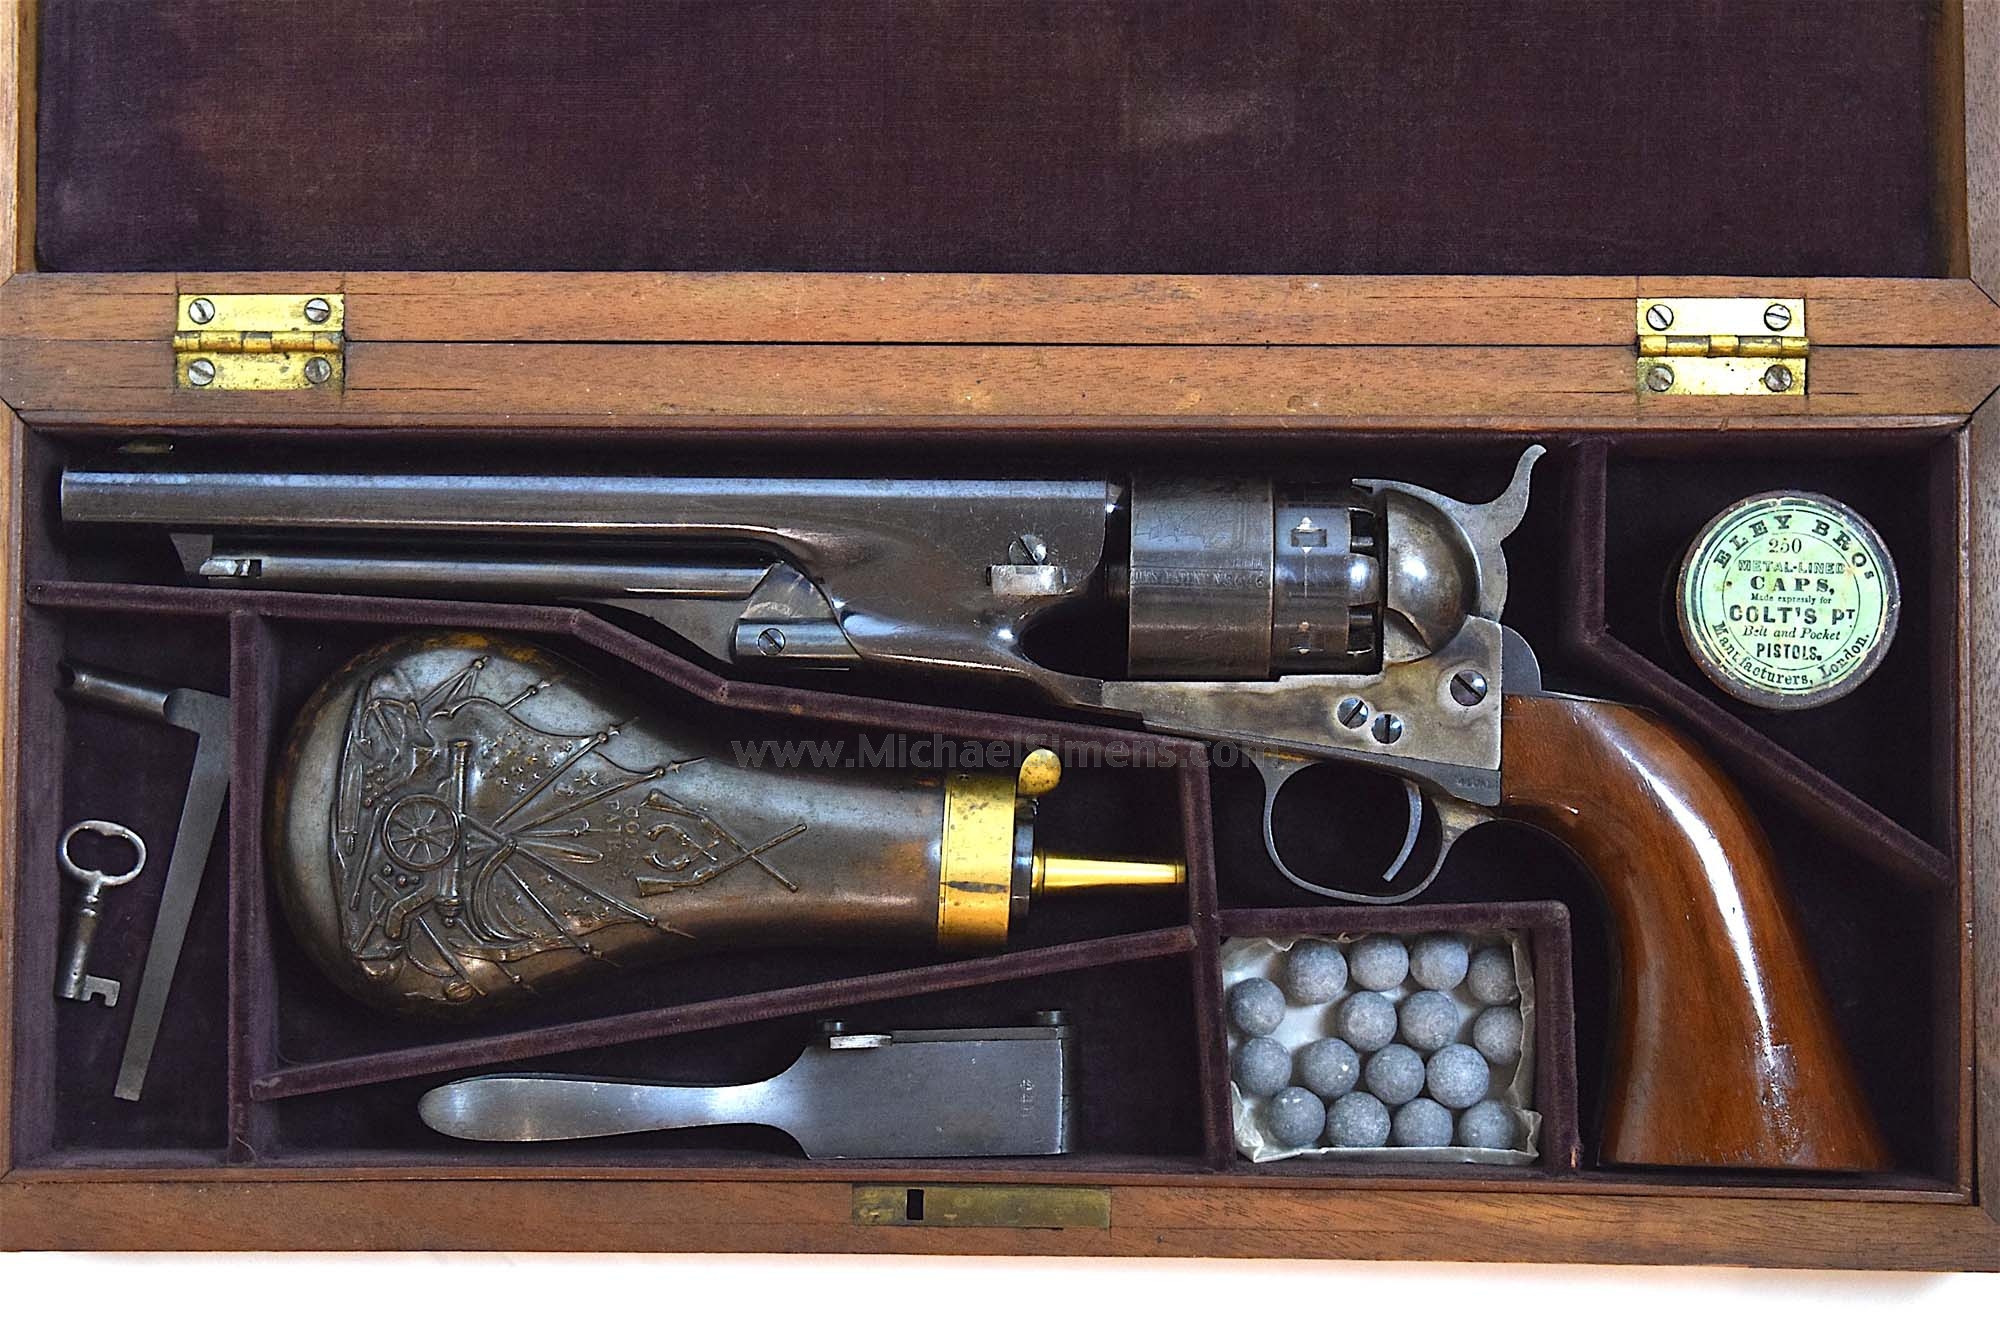 COLT 1860 ARMY REVOLVER CASED WITH ACCESSORIES